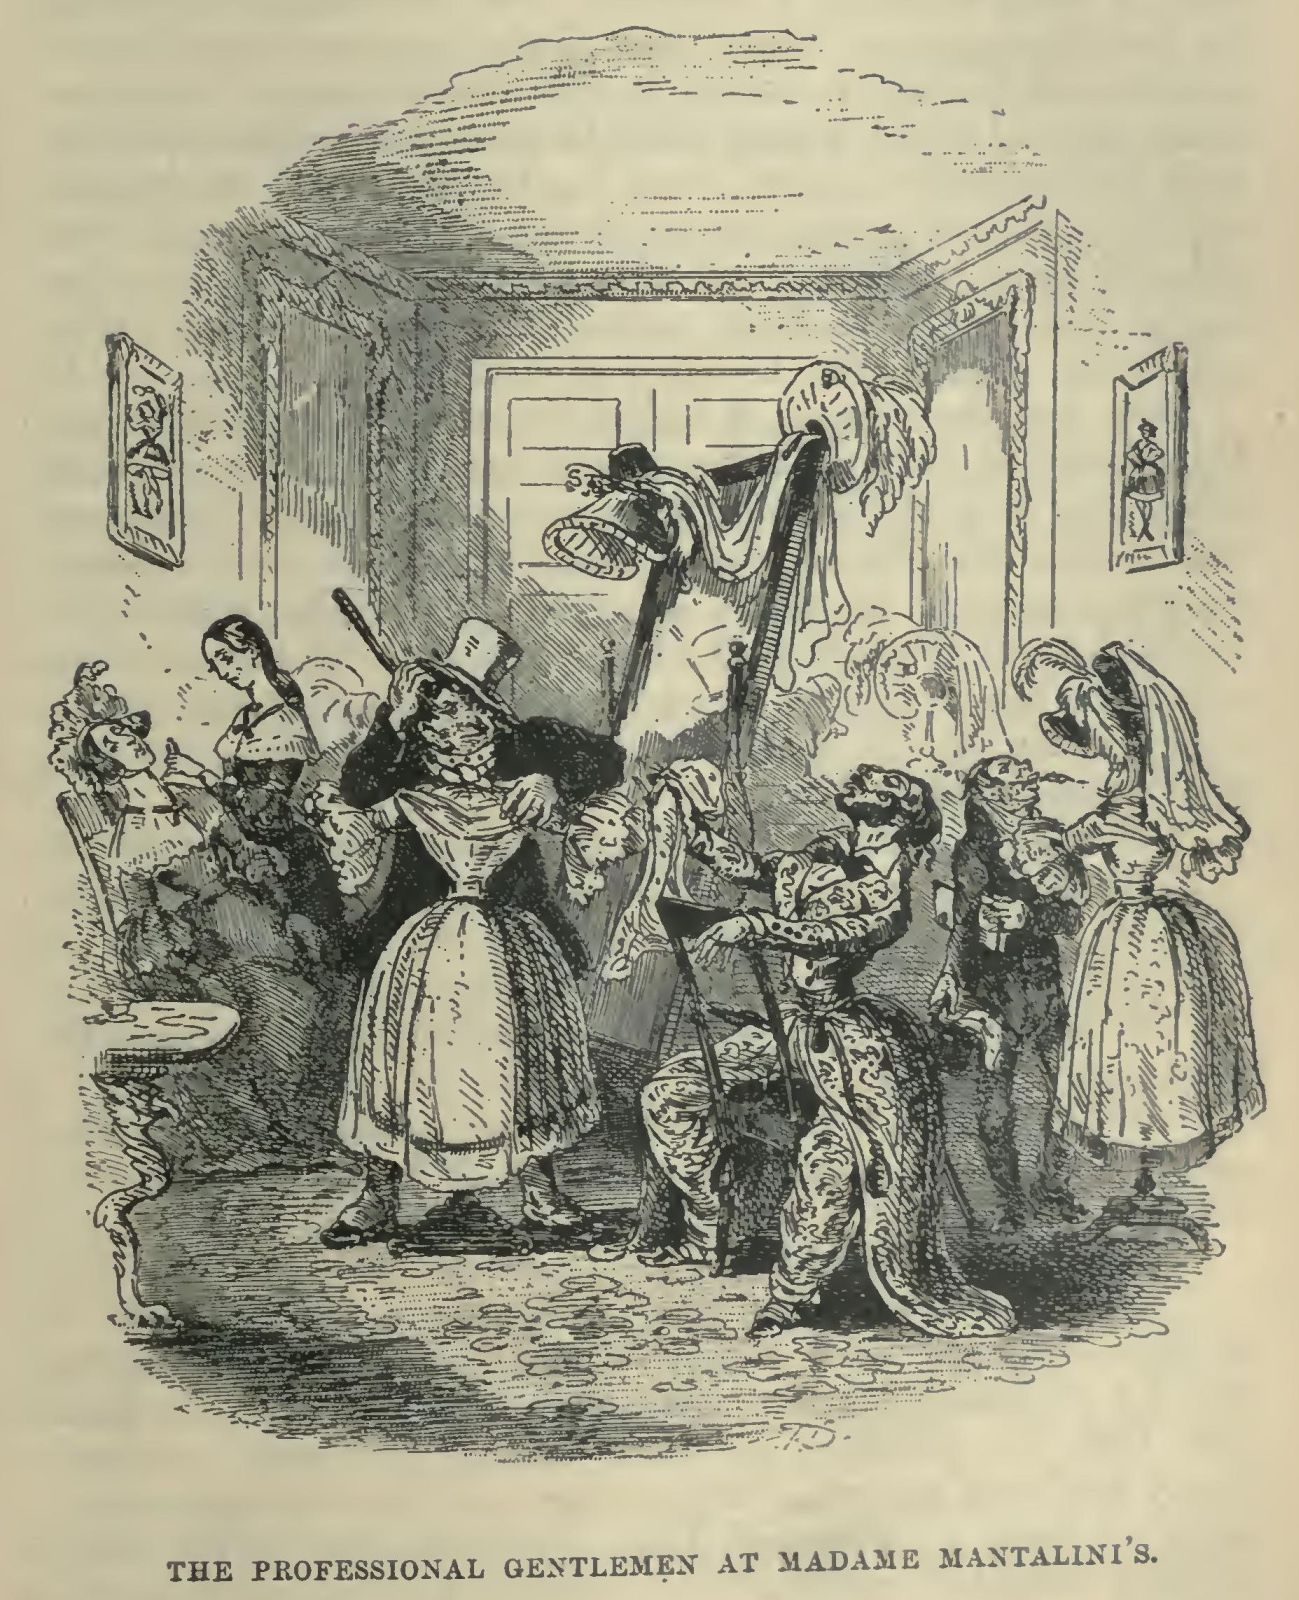 The Life and Adventures of Nicholas Nickleby, by Charles Dickens